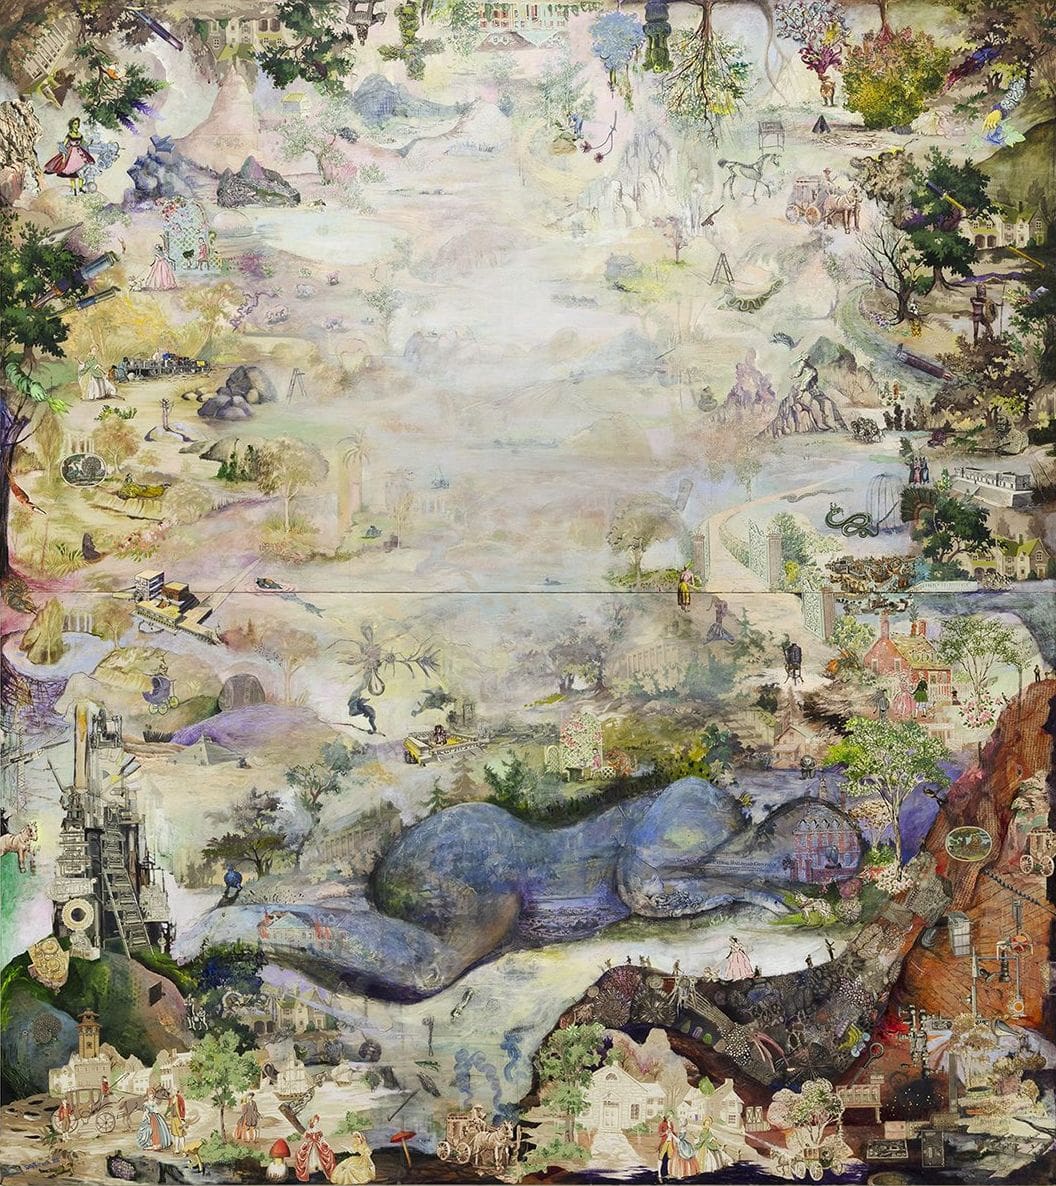 Napping at the Altar of the Gods, 2022 Ink, acrylic, antique wallpaper on panel 33 3/4 x 60 1/2 inches (85.7 x 153.7 cm) each 67 1/2 x 60 1/2 inches (171.5 x 153.7 cm) total